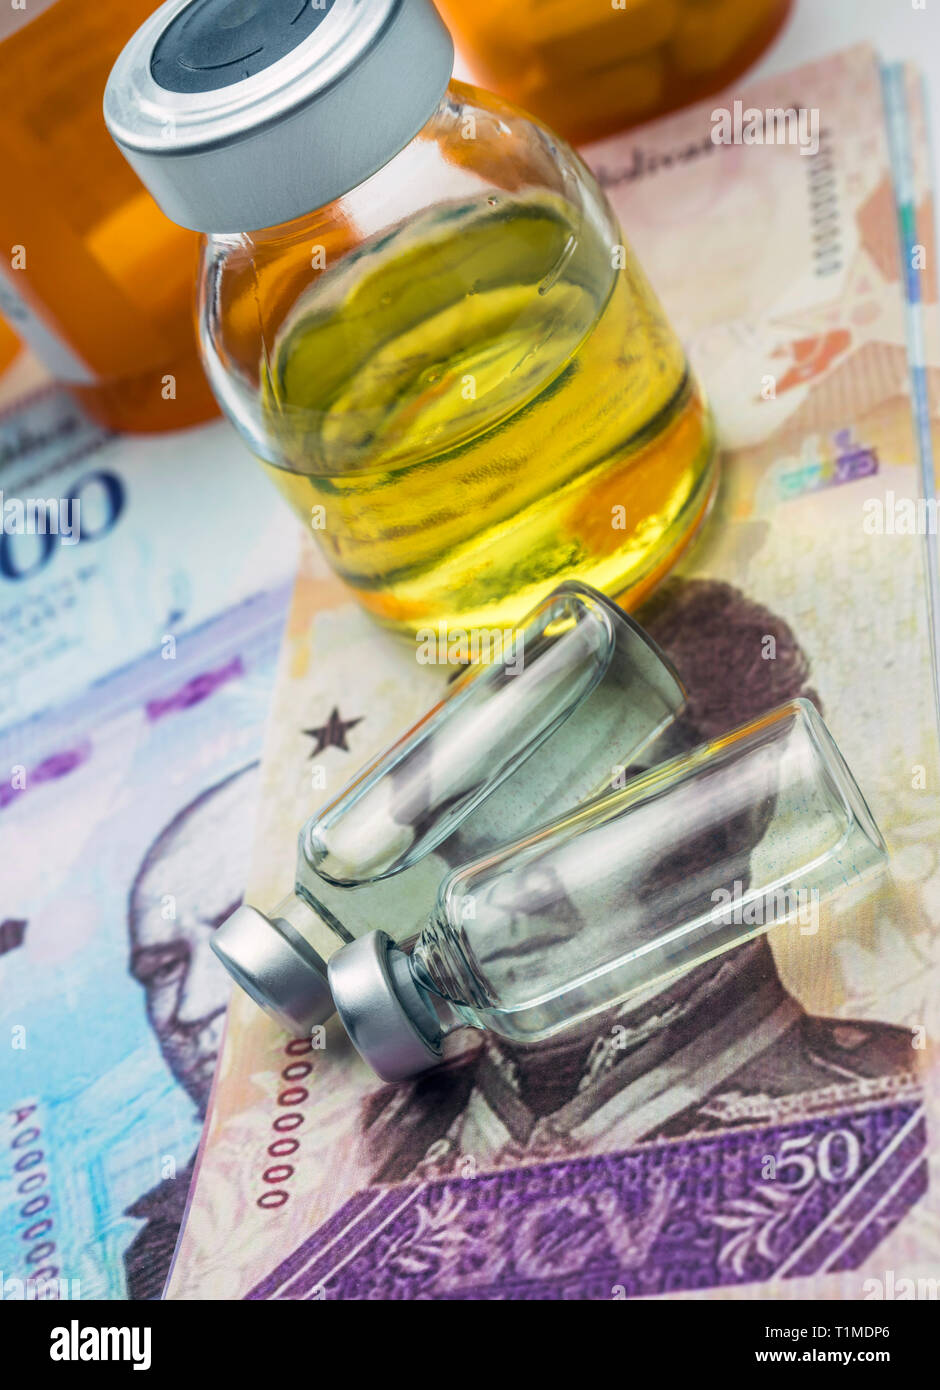 Vials with medication on banknotes Bolivarian, shady deal of medicines in full crisis of Latin American country, conceptual image Stock Photo